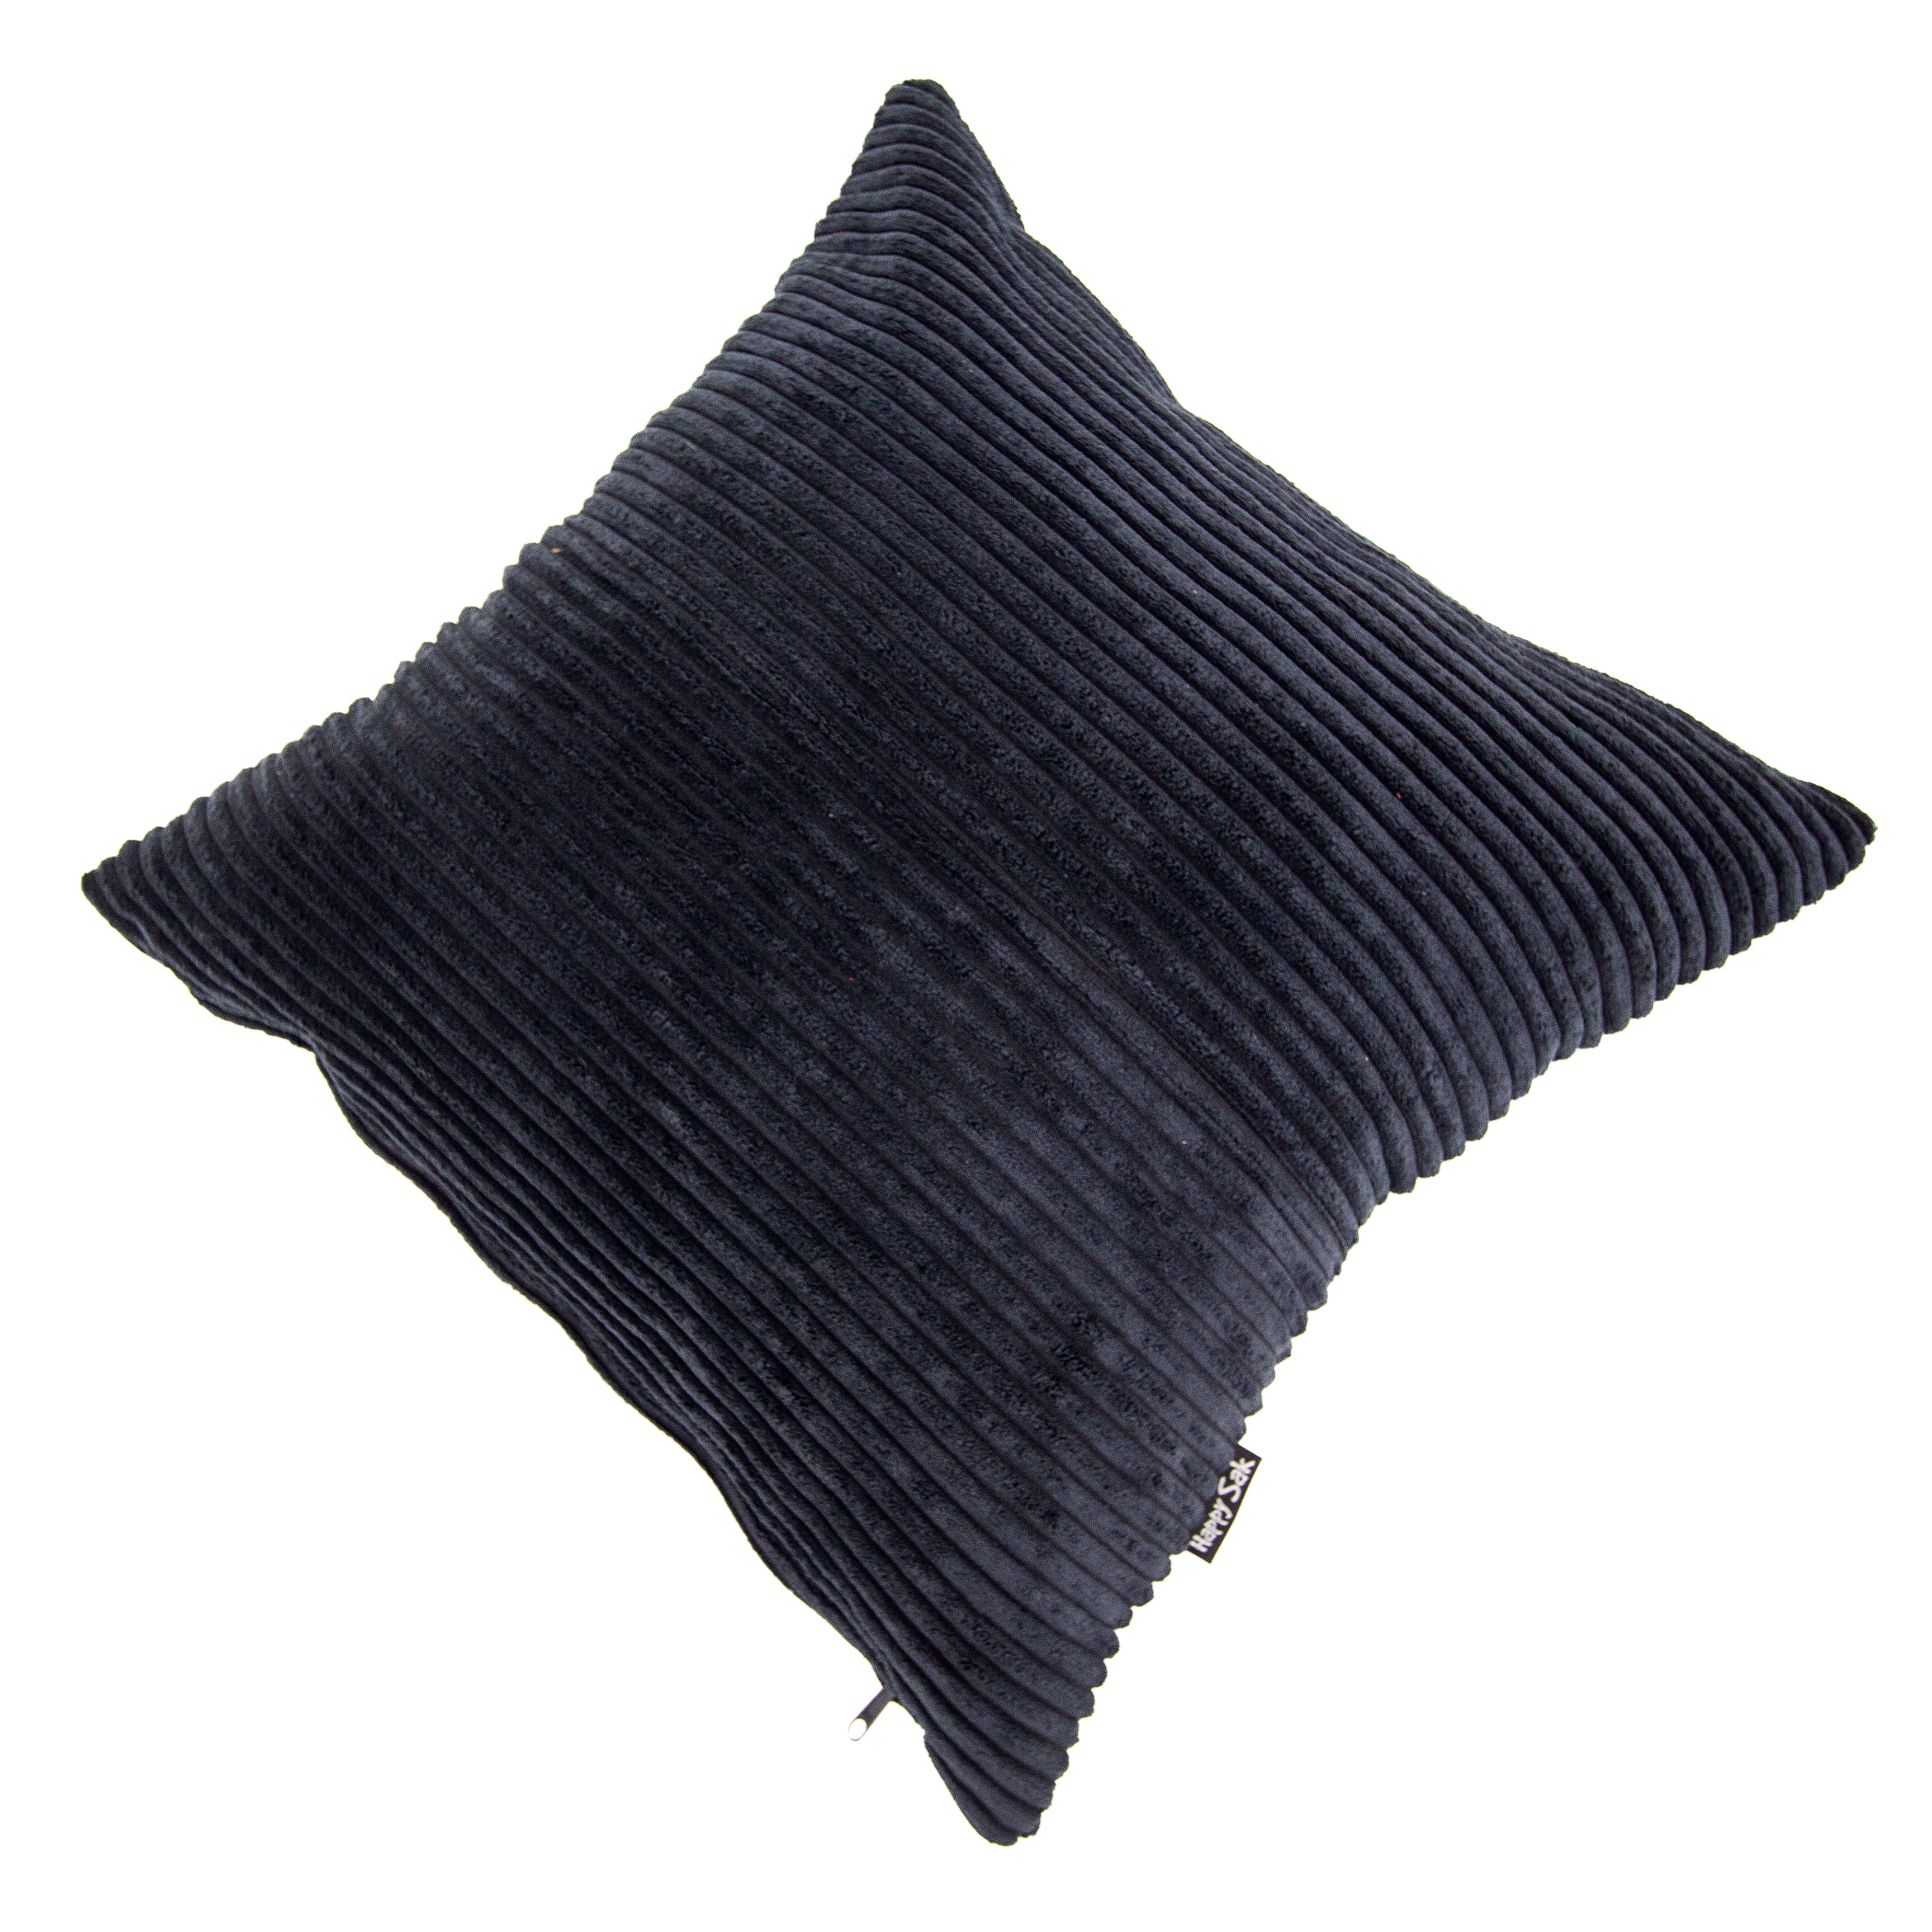 Scatters Black Corduroy Extra Cover